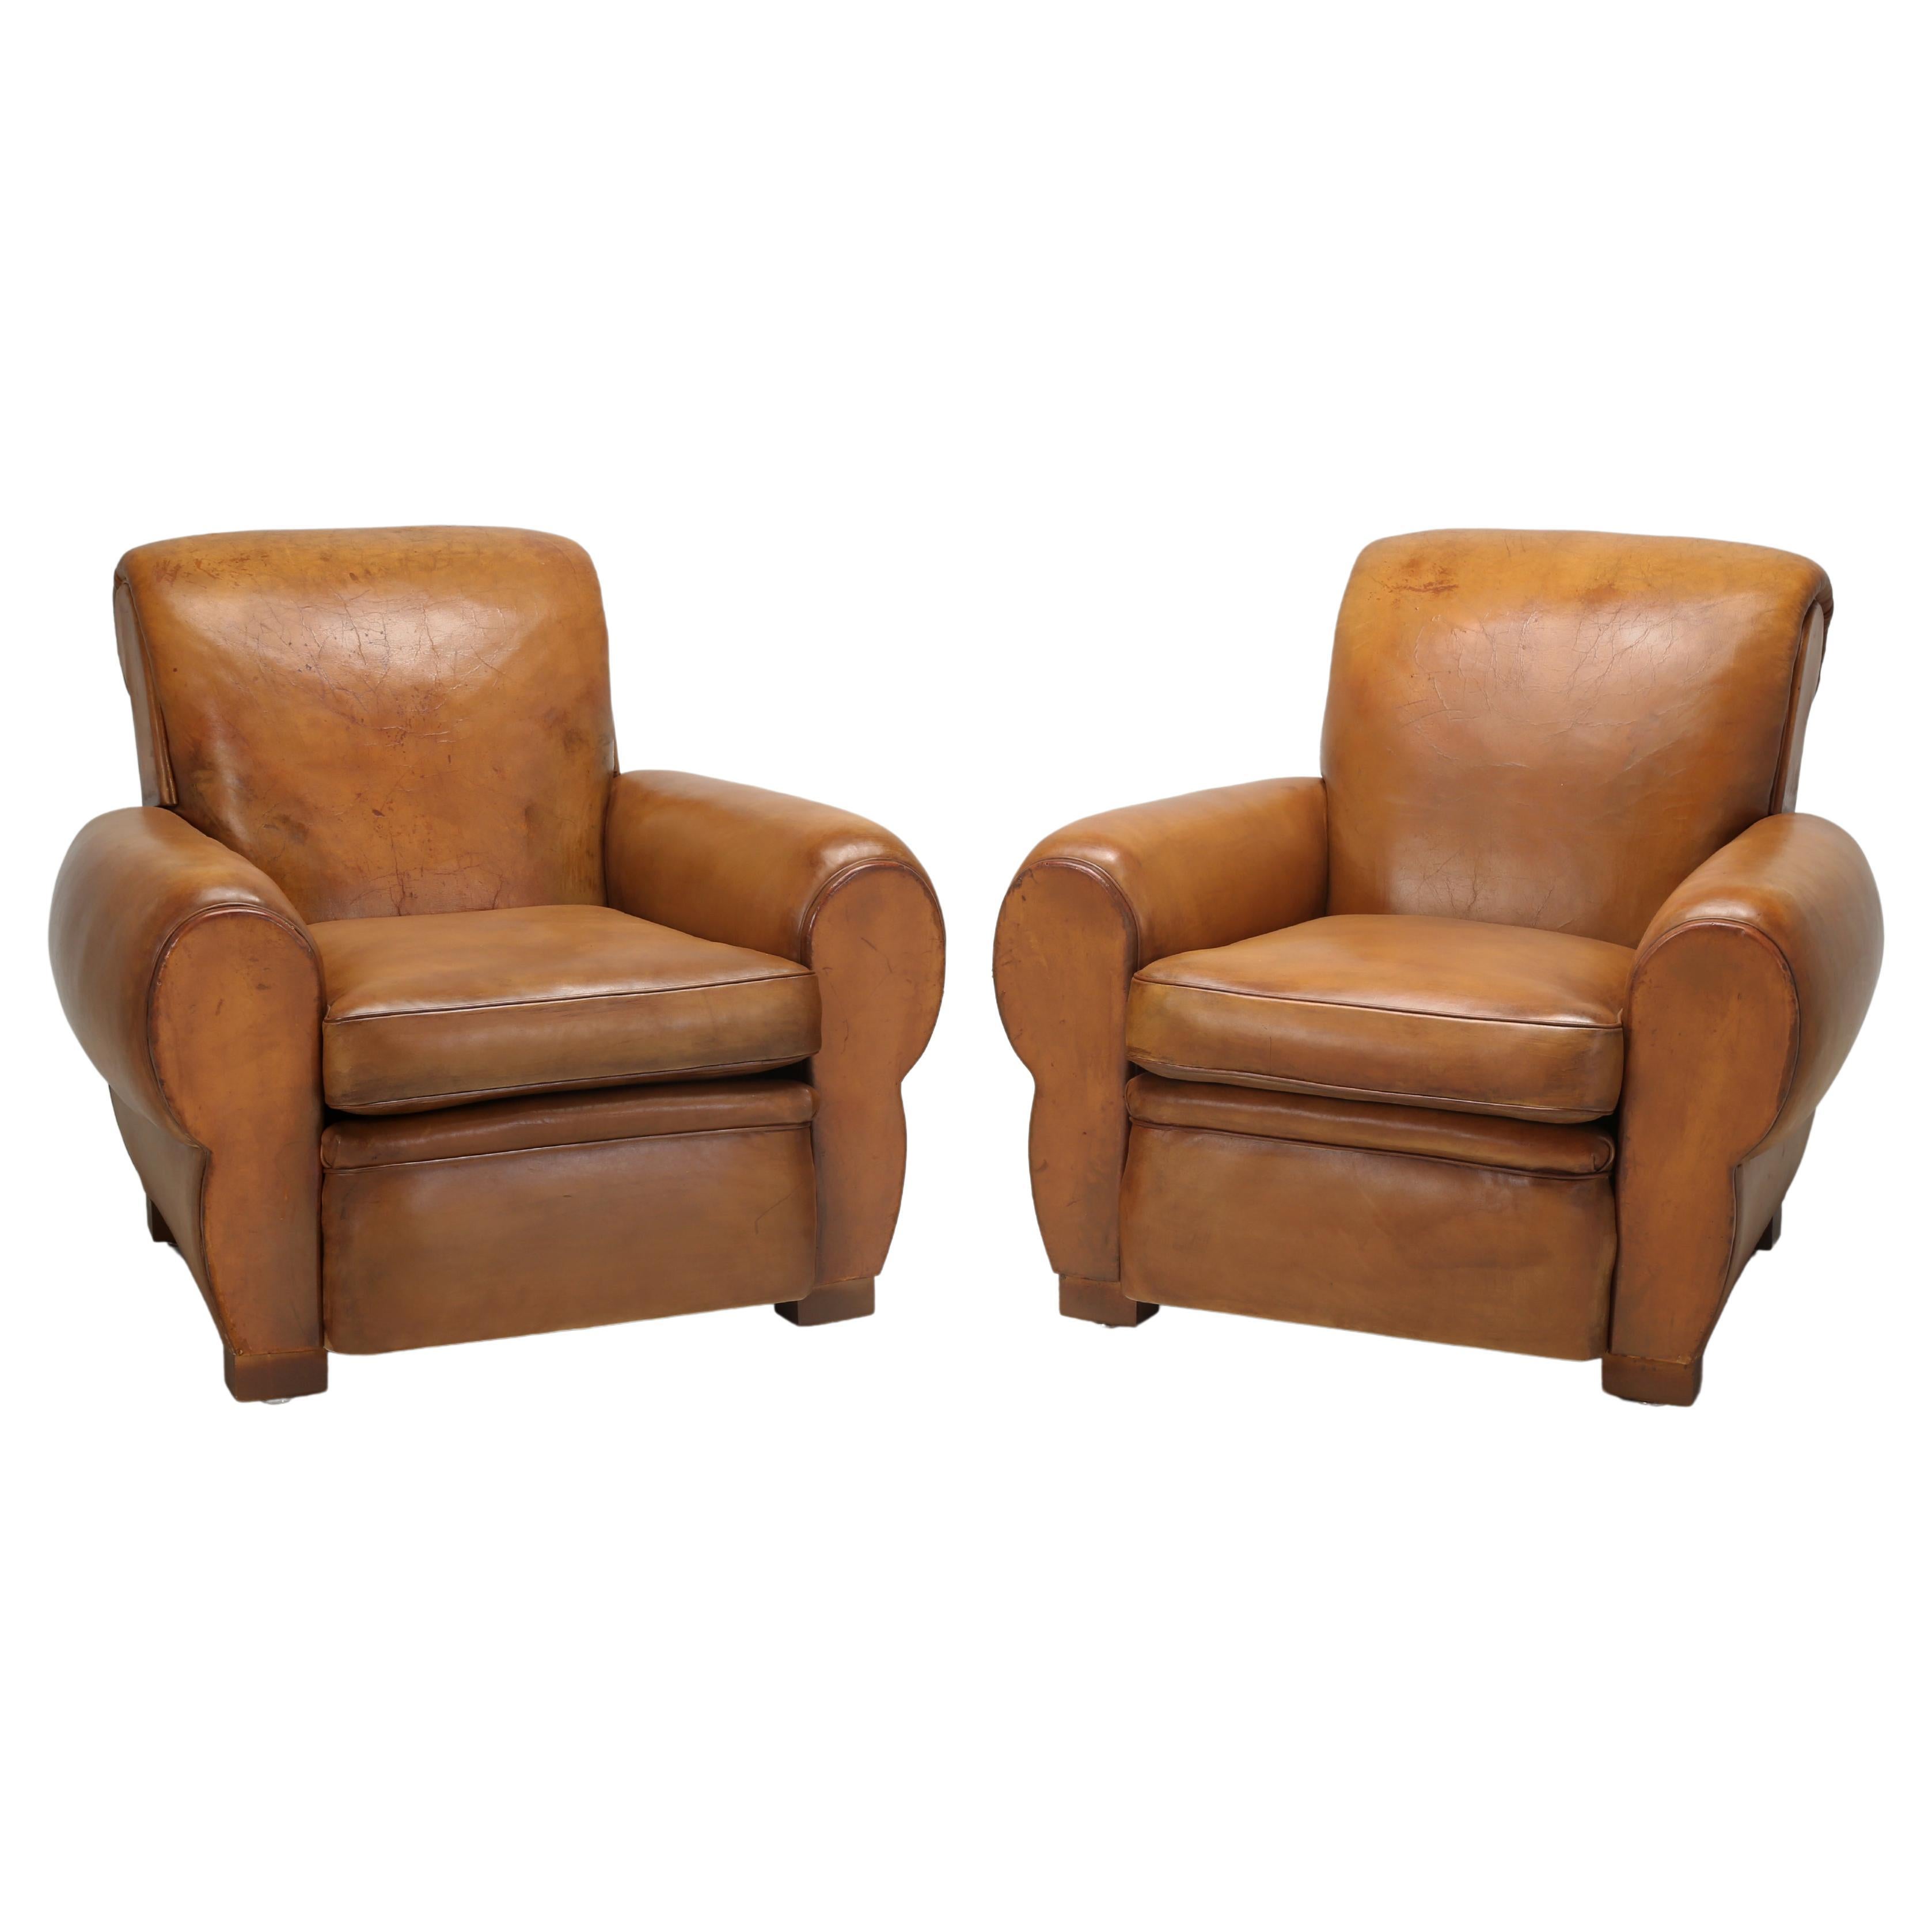 French Leather Club Chairs Properly Restored from Inside Out, Original Leather